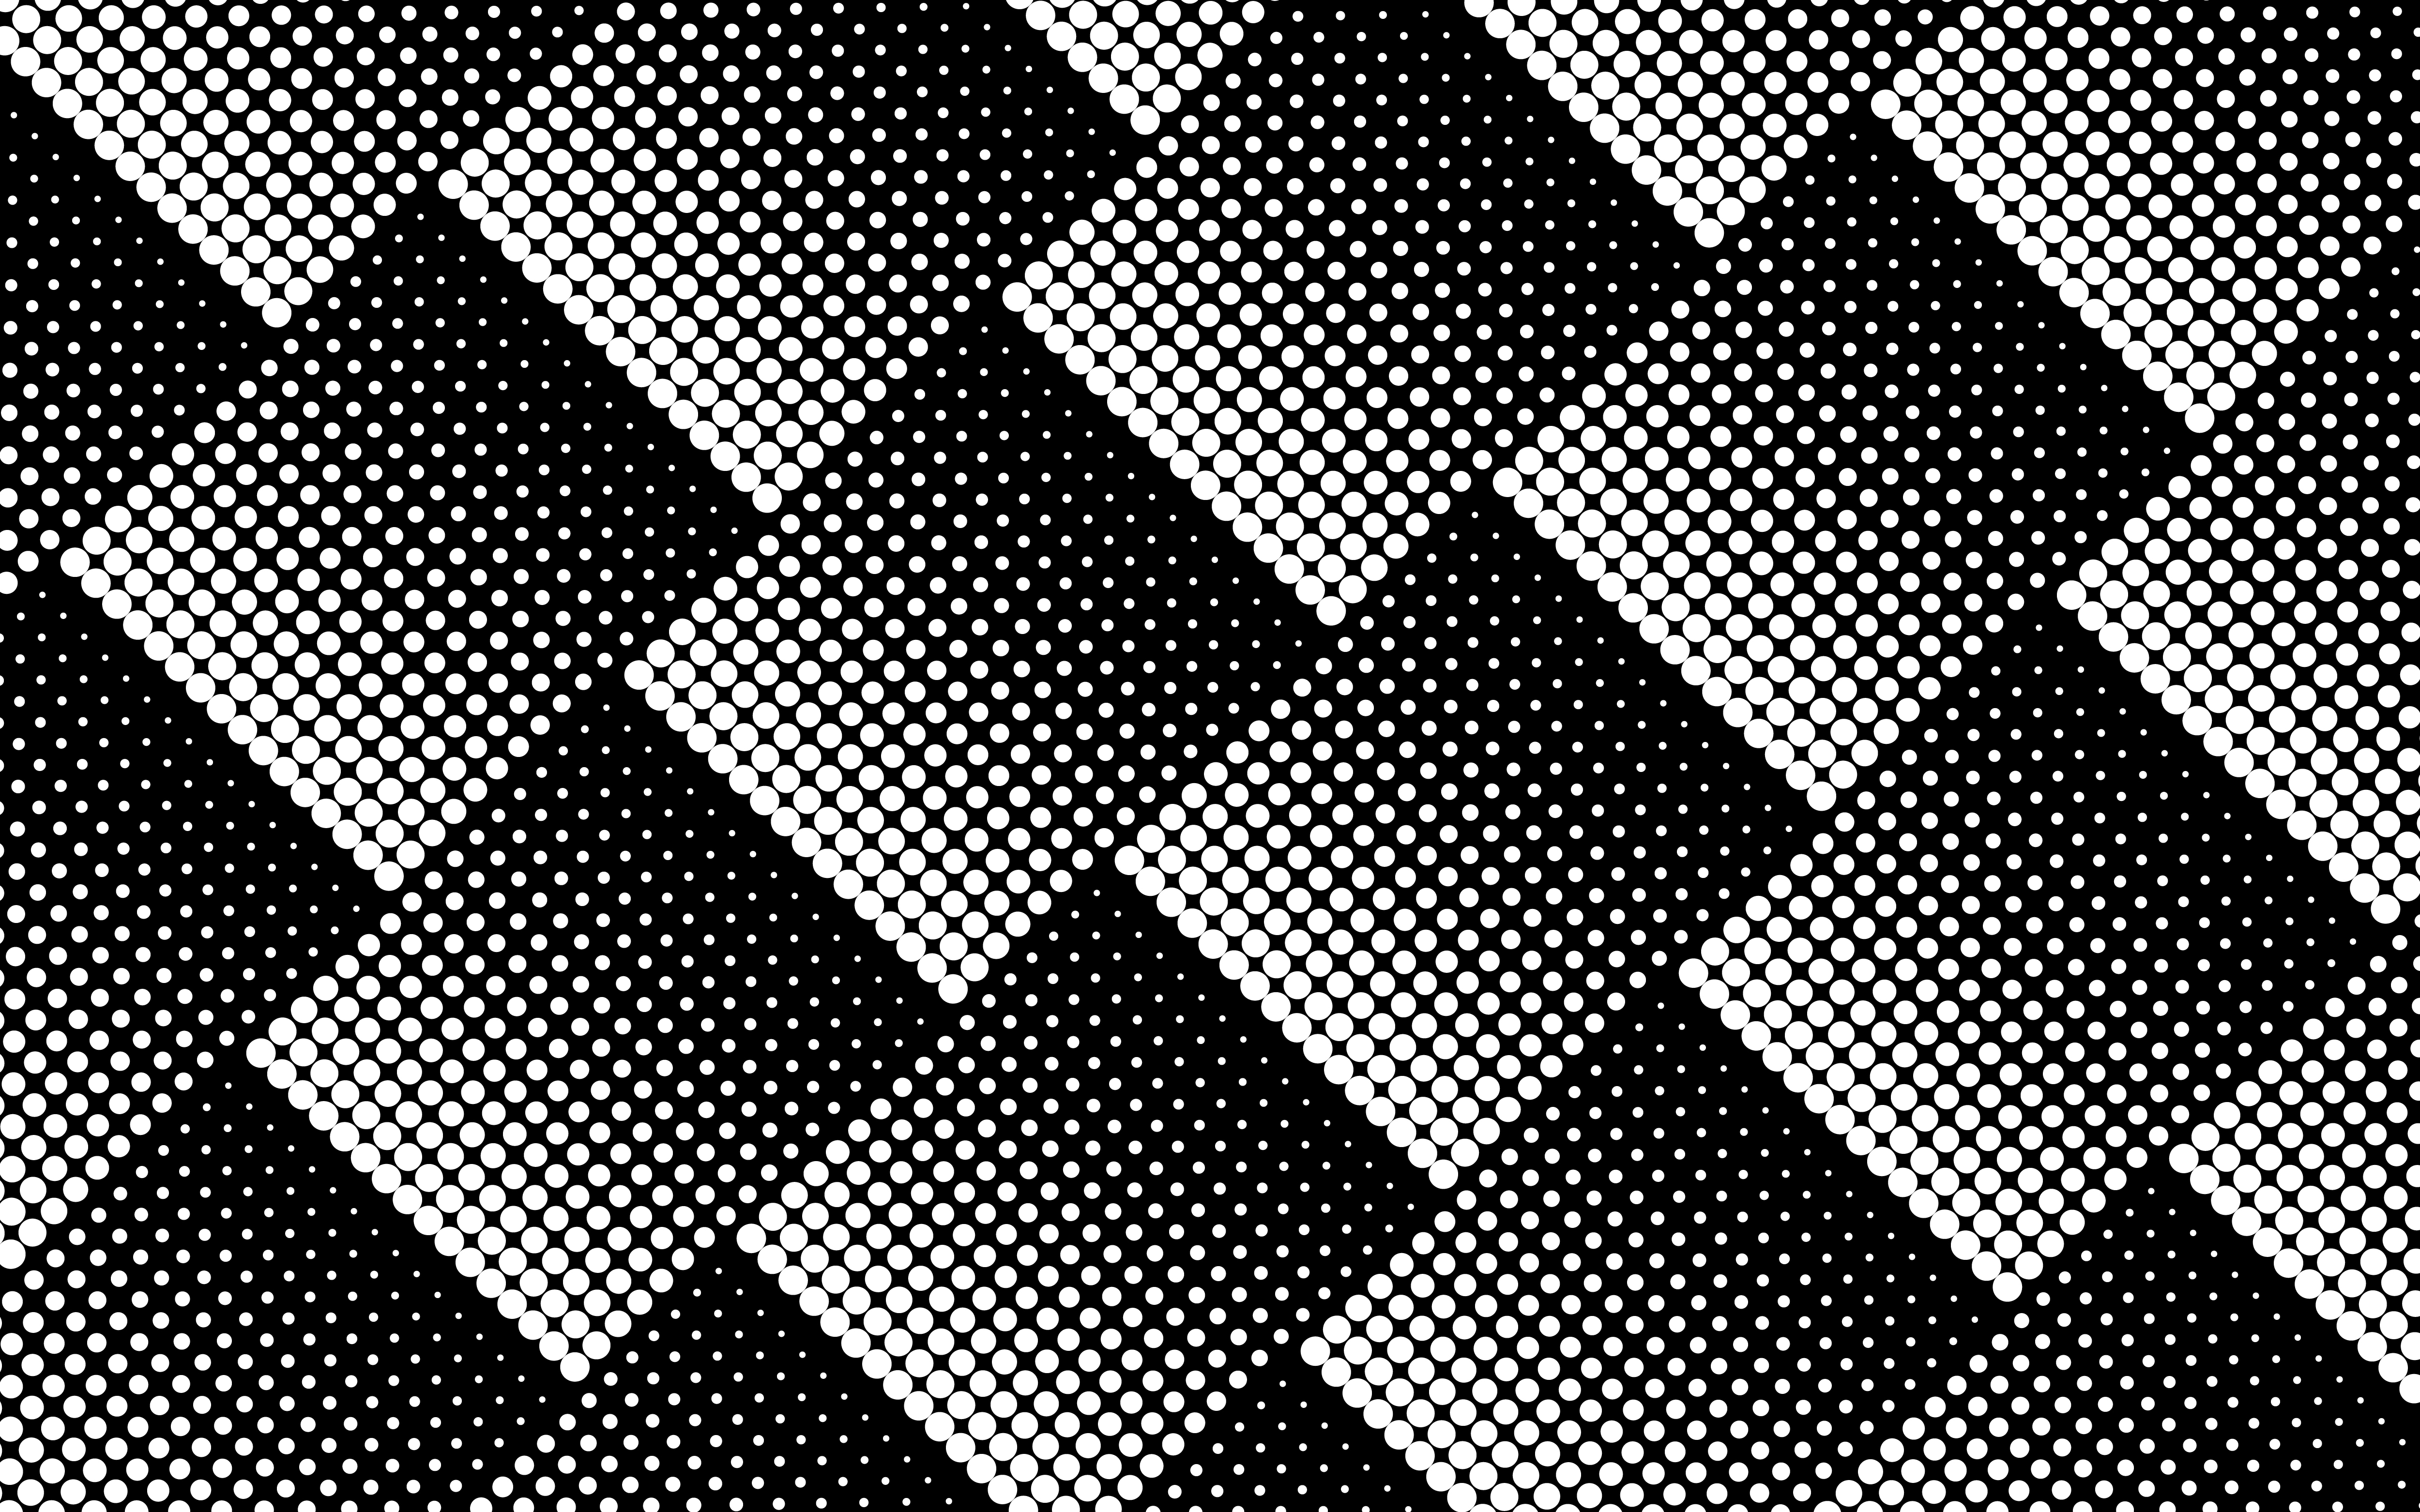 Halftone design in black and white - Download Free Vectors, Clipart